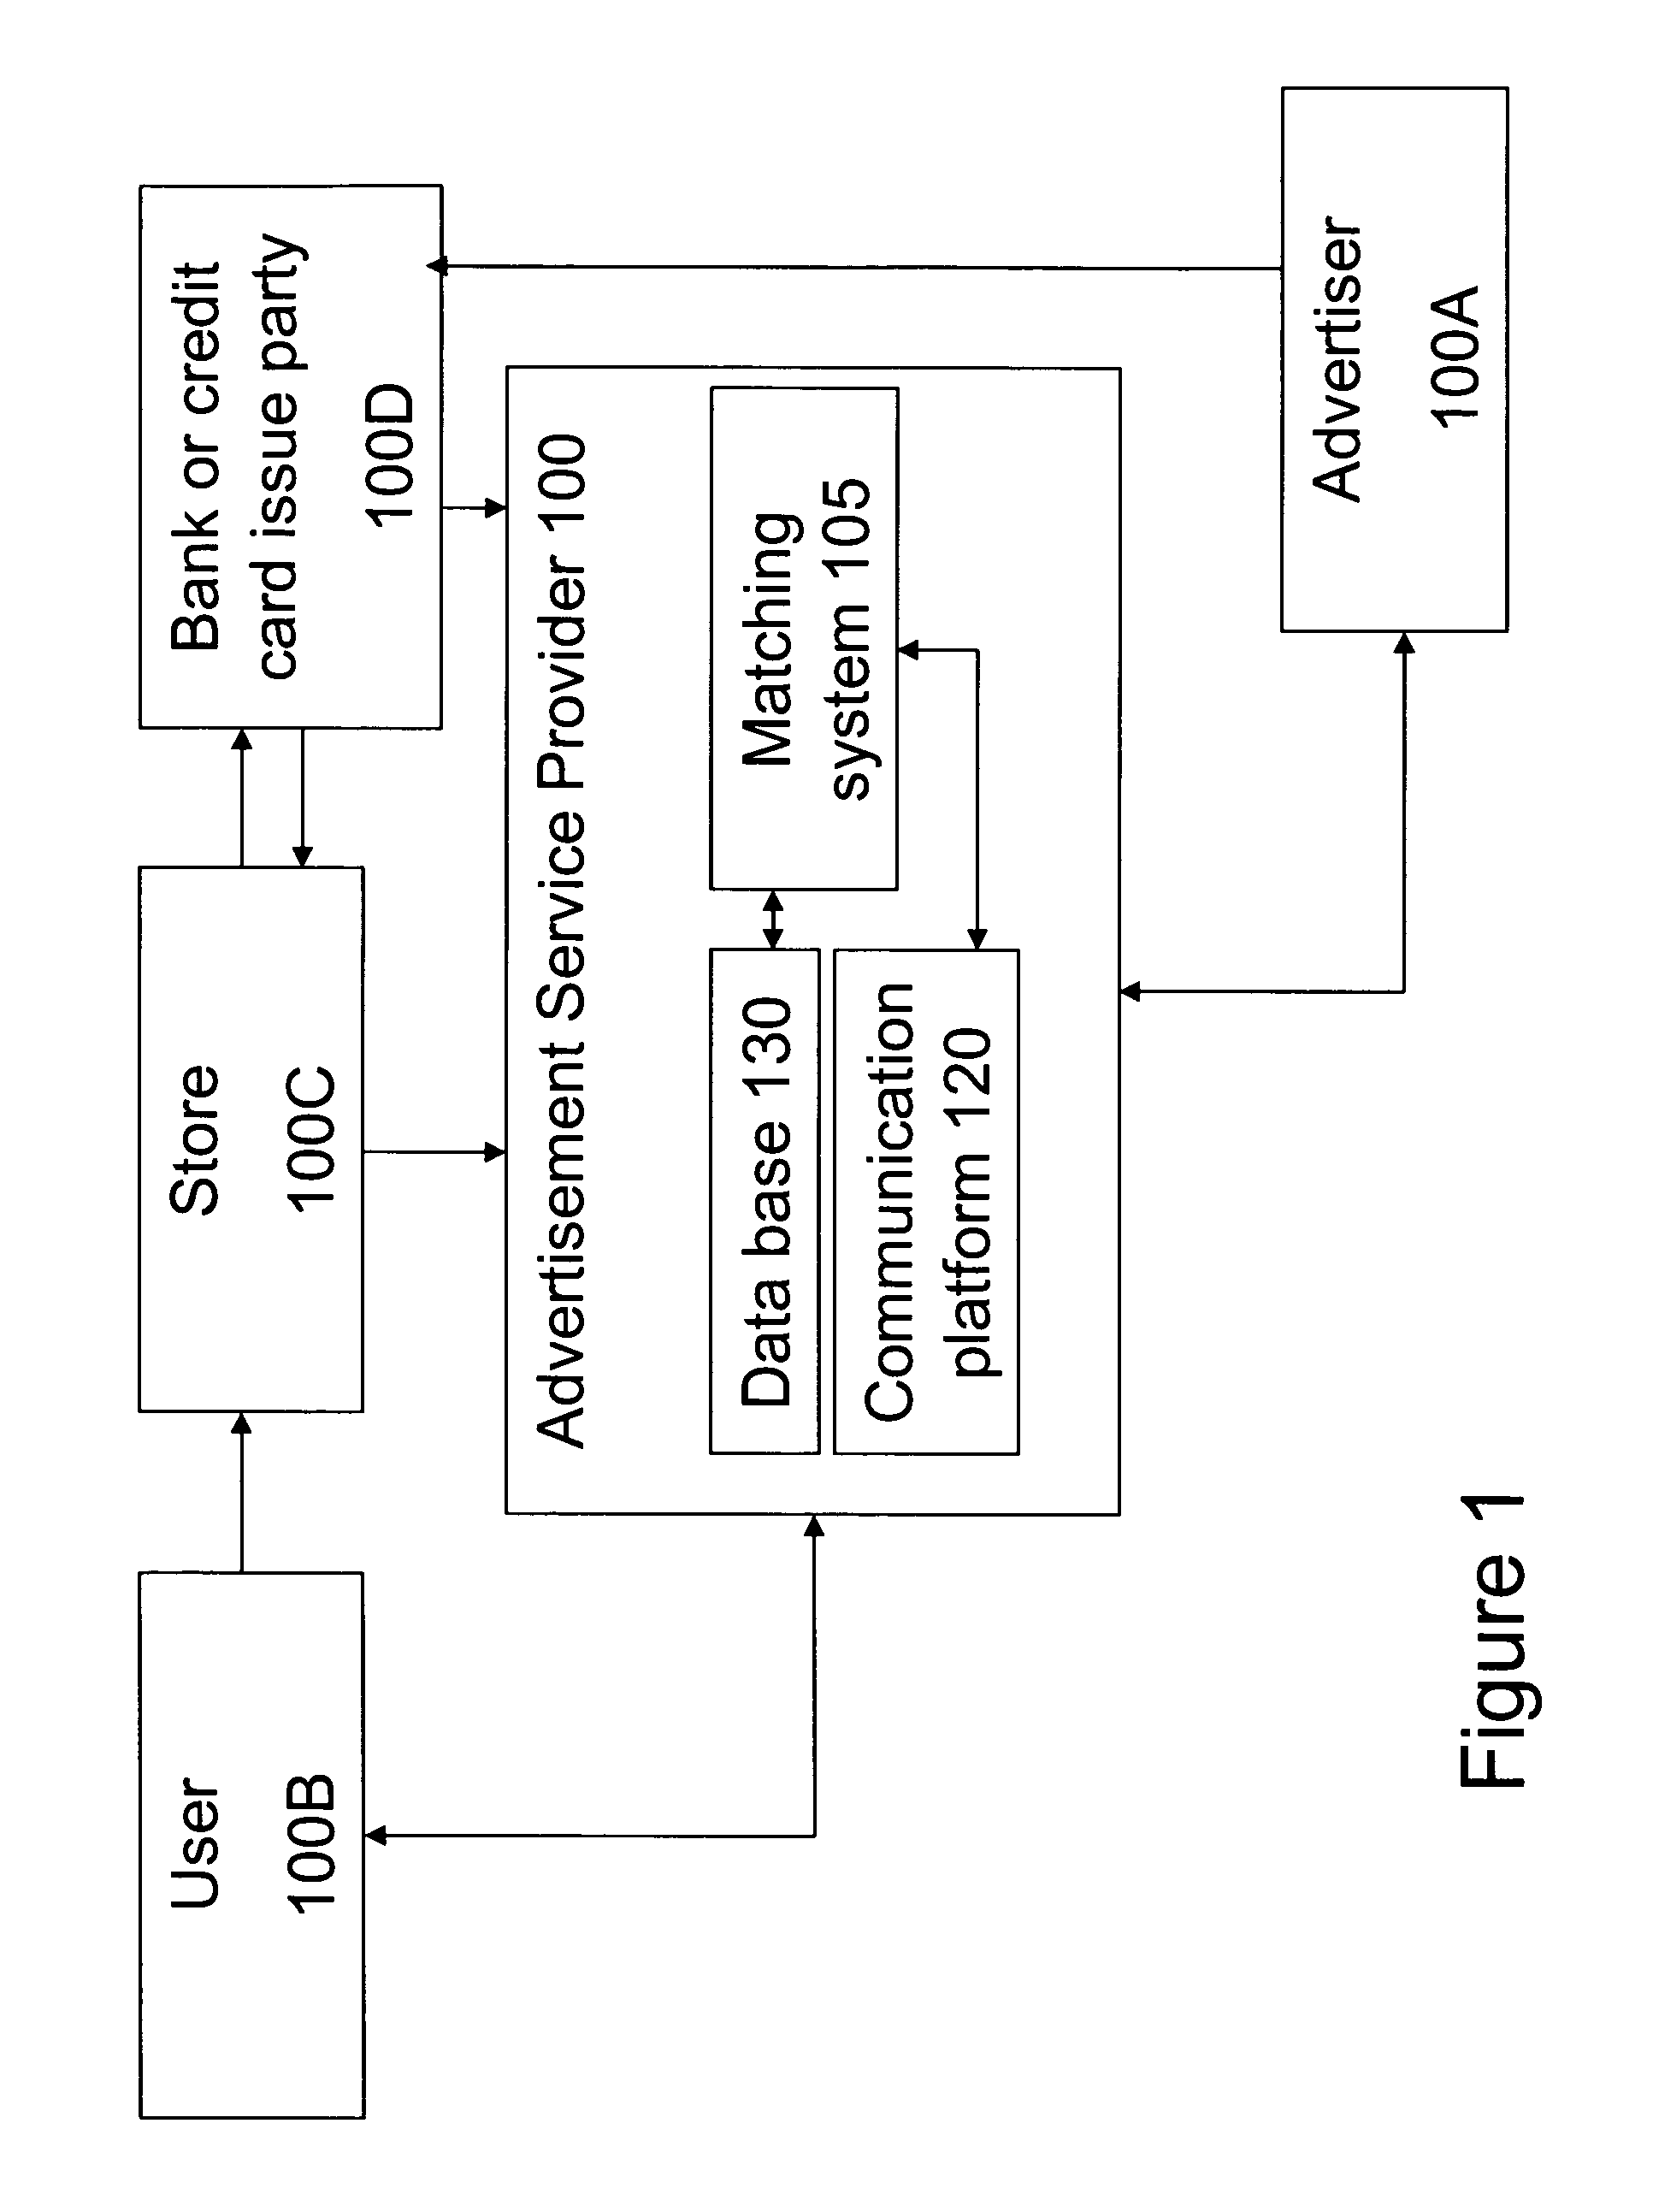 System and method of advertisement via mobile terminal